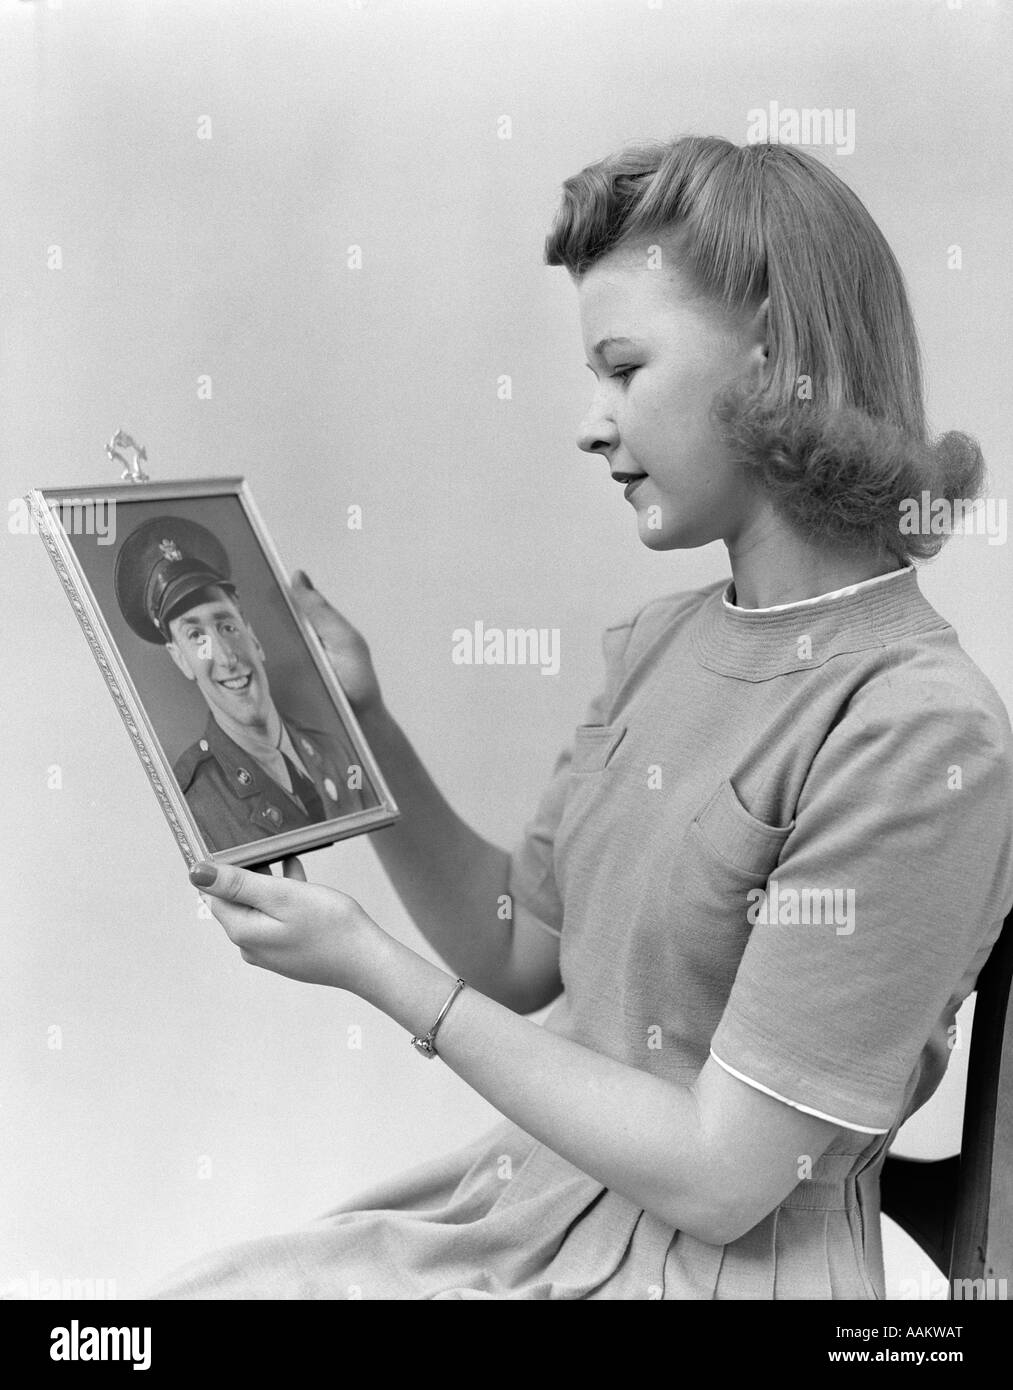 1940s YOUNG WOMAN TEEN GIRL HOLDING FRAMED PHOTO OF MAN IN MILITARY UNIFORM Stock Photo